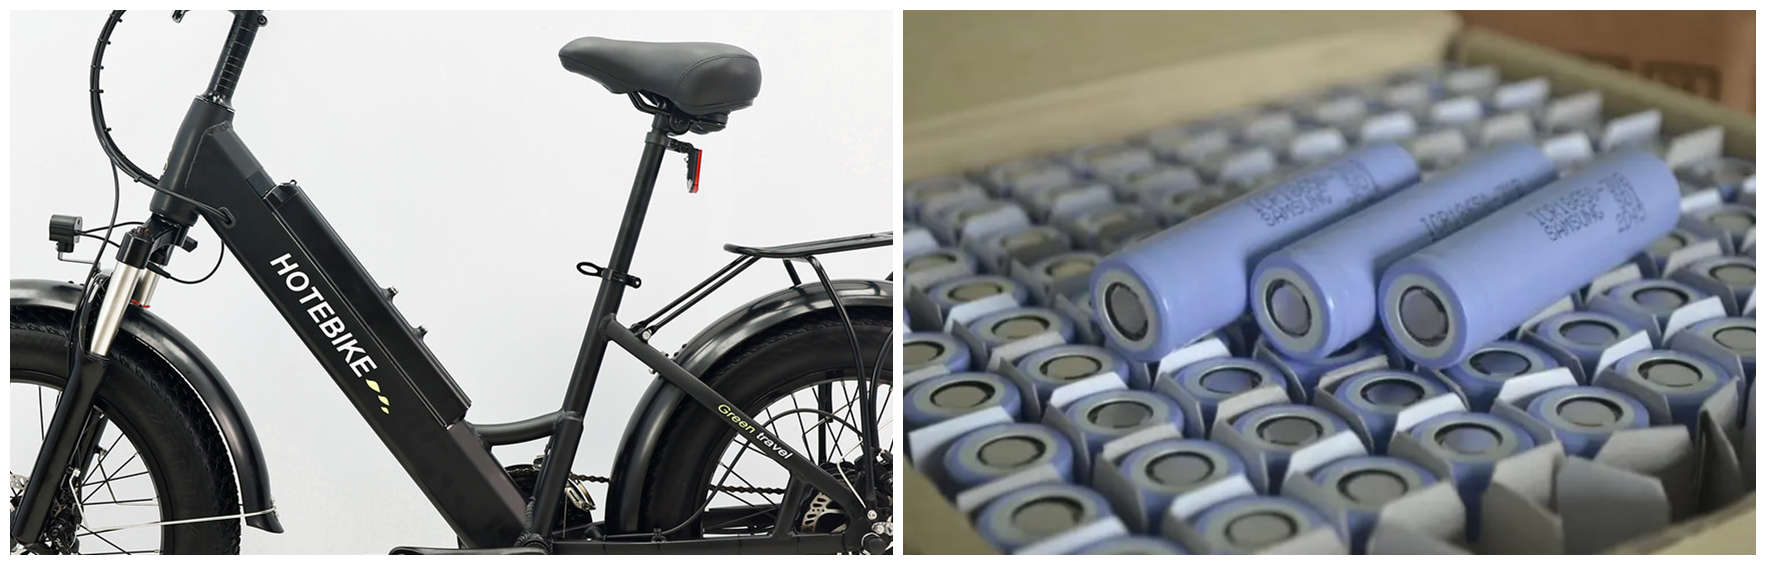 Revolutionizing Your Ride - Our Unique 20-Inch Electric Bicycle - Blog - 3